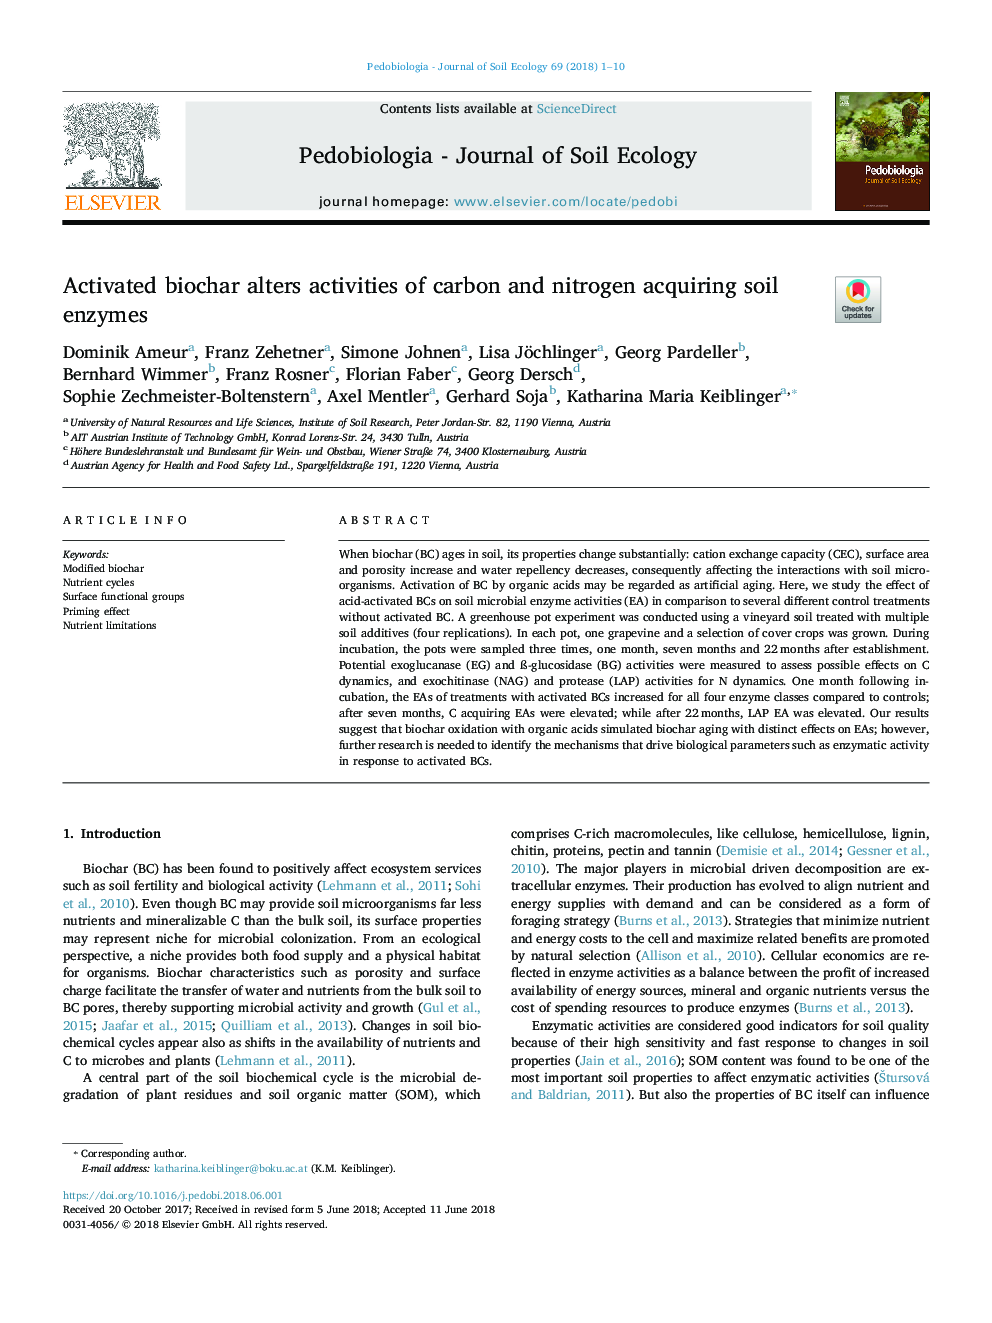 Activated biochar alters activities of carbon and nitrogen acquiring soil enzymes